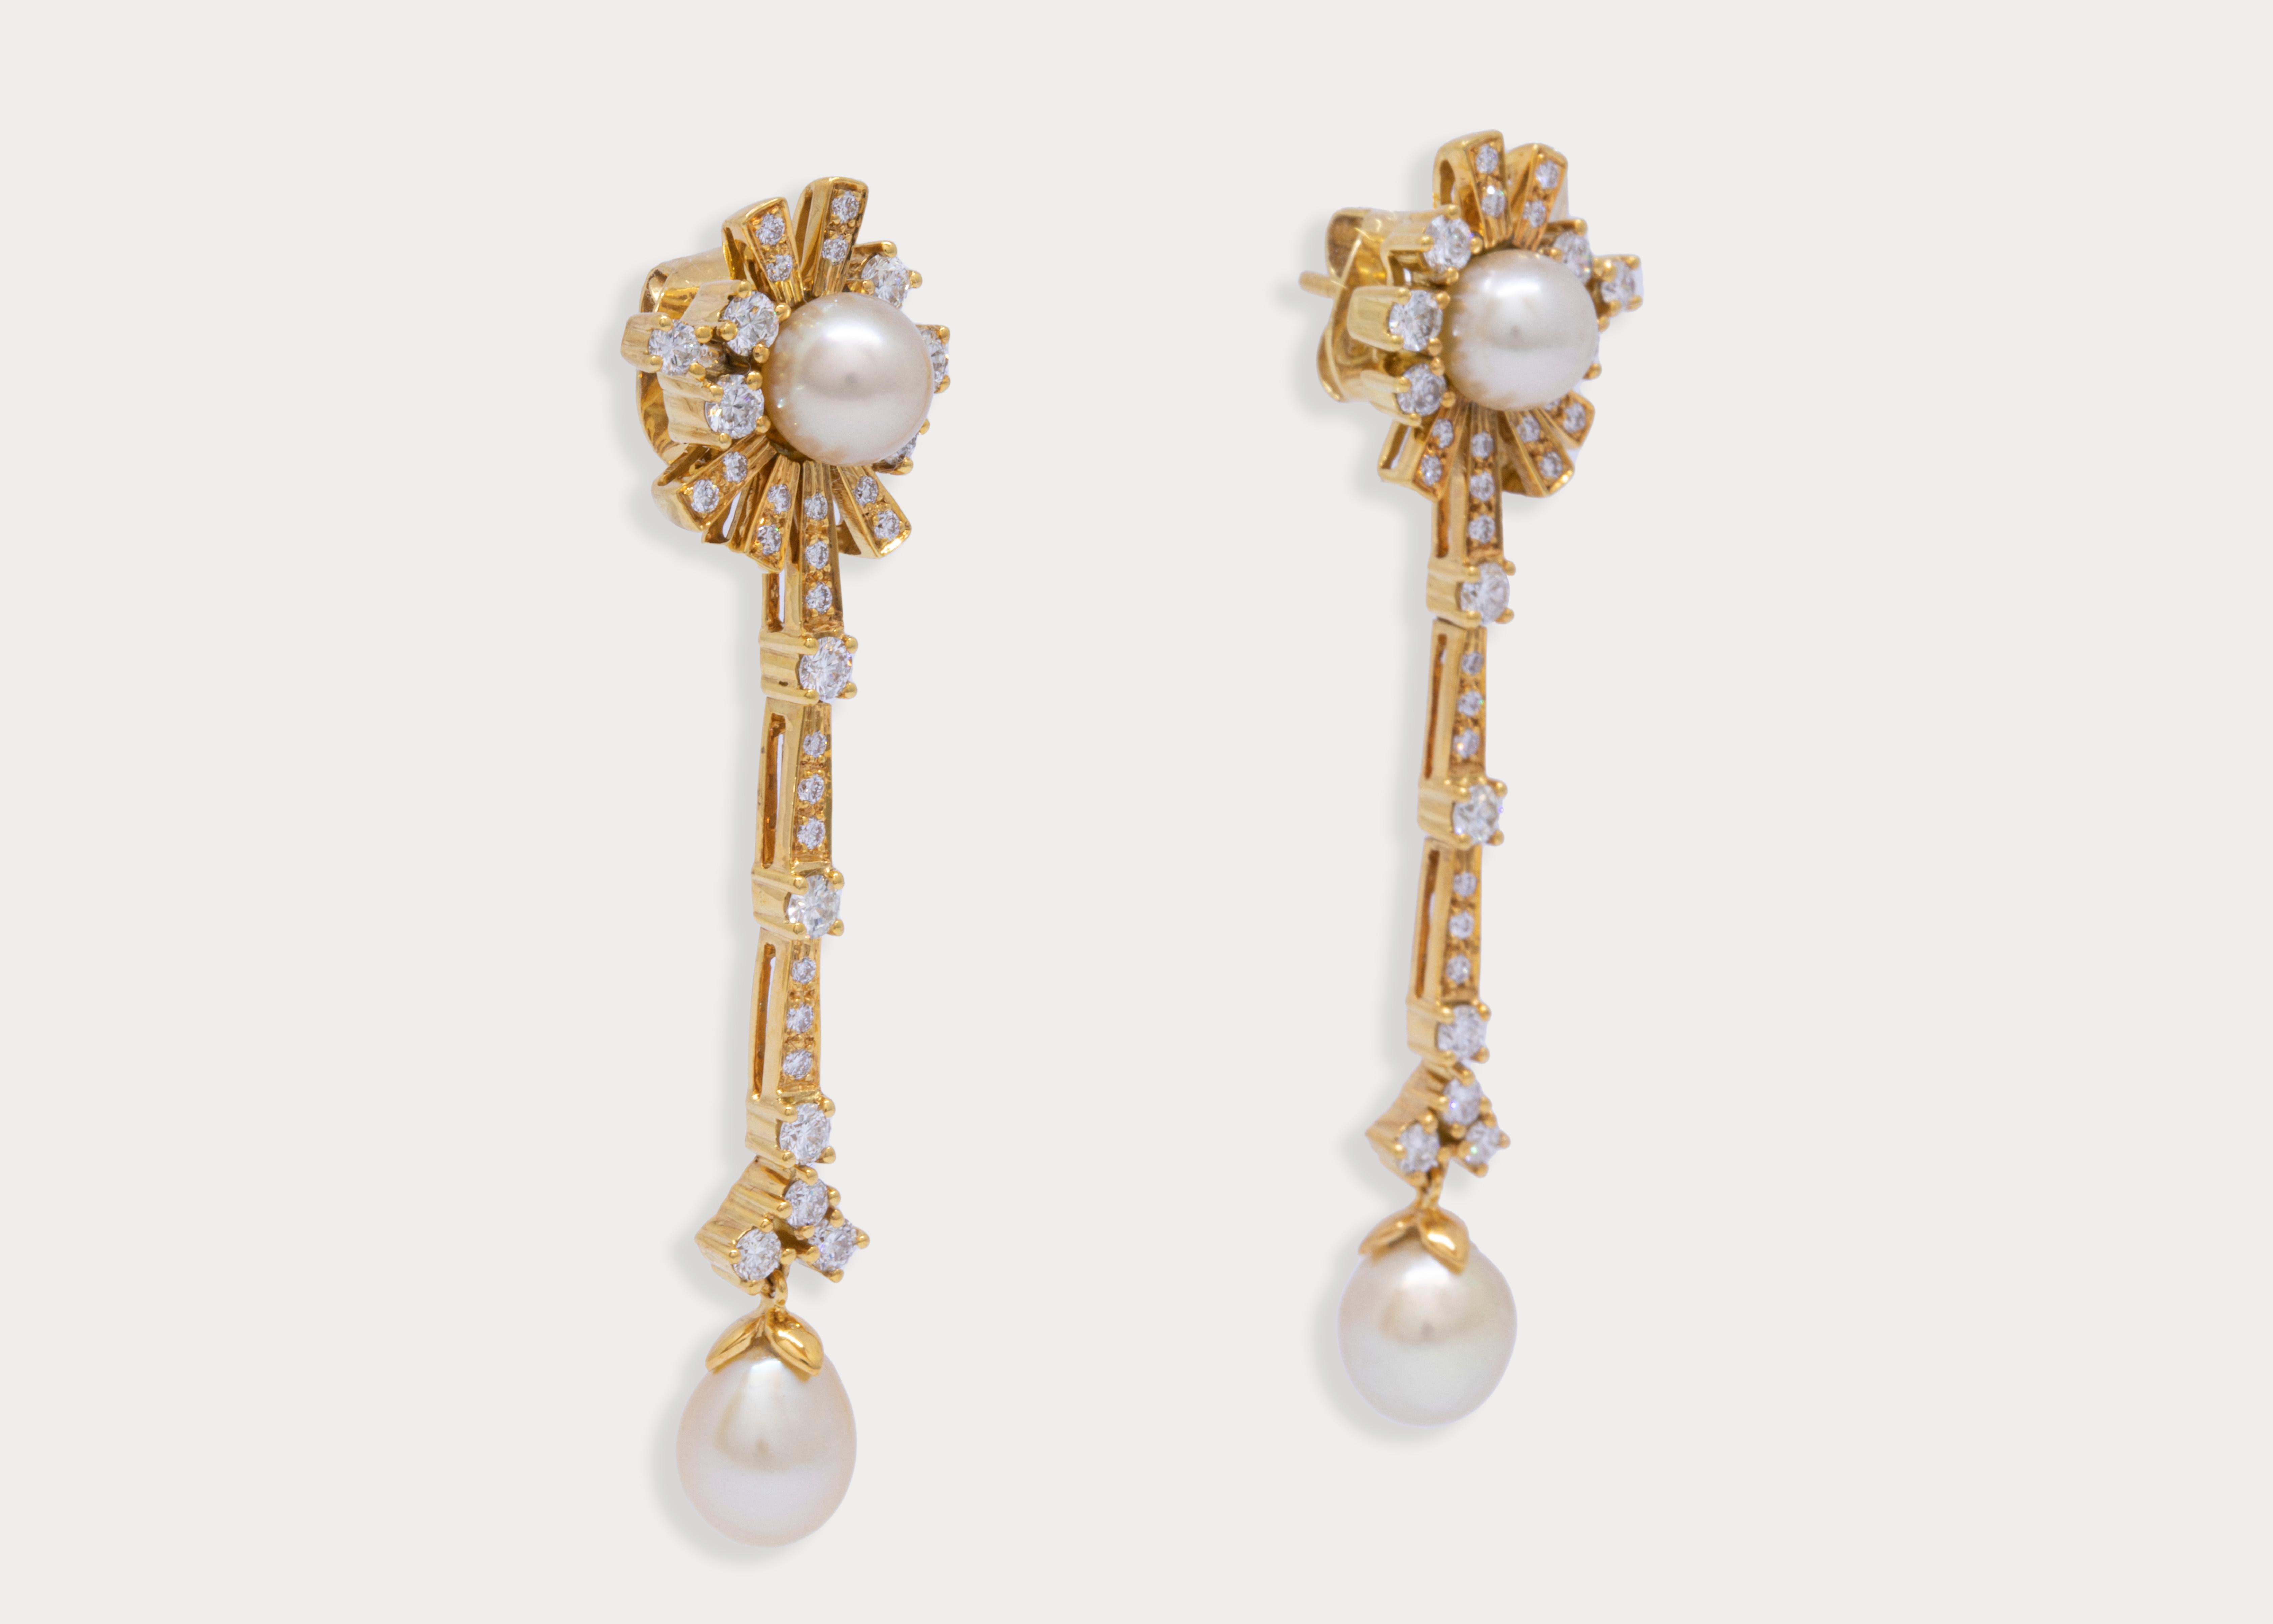 Identical pearl buttons and drops gives these vintage looking earrings its distinctiveness...

High luster, flawless Pinctada Radiata pearls are surrounded by round cut diamonds of different sizes.

Gold Weight: 9.8 g
Pearl Buttons Weight: 4.13